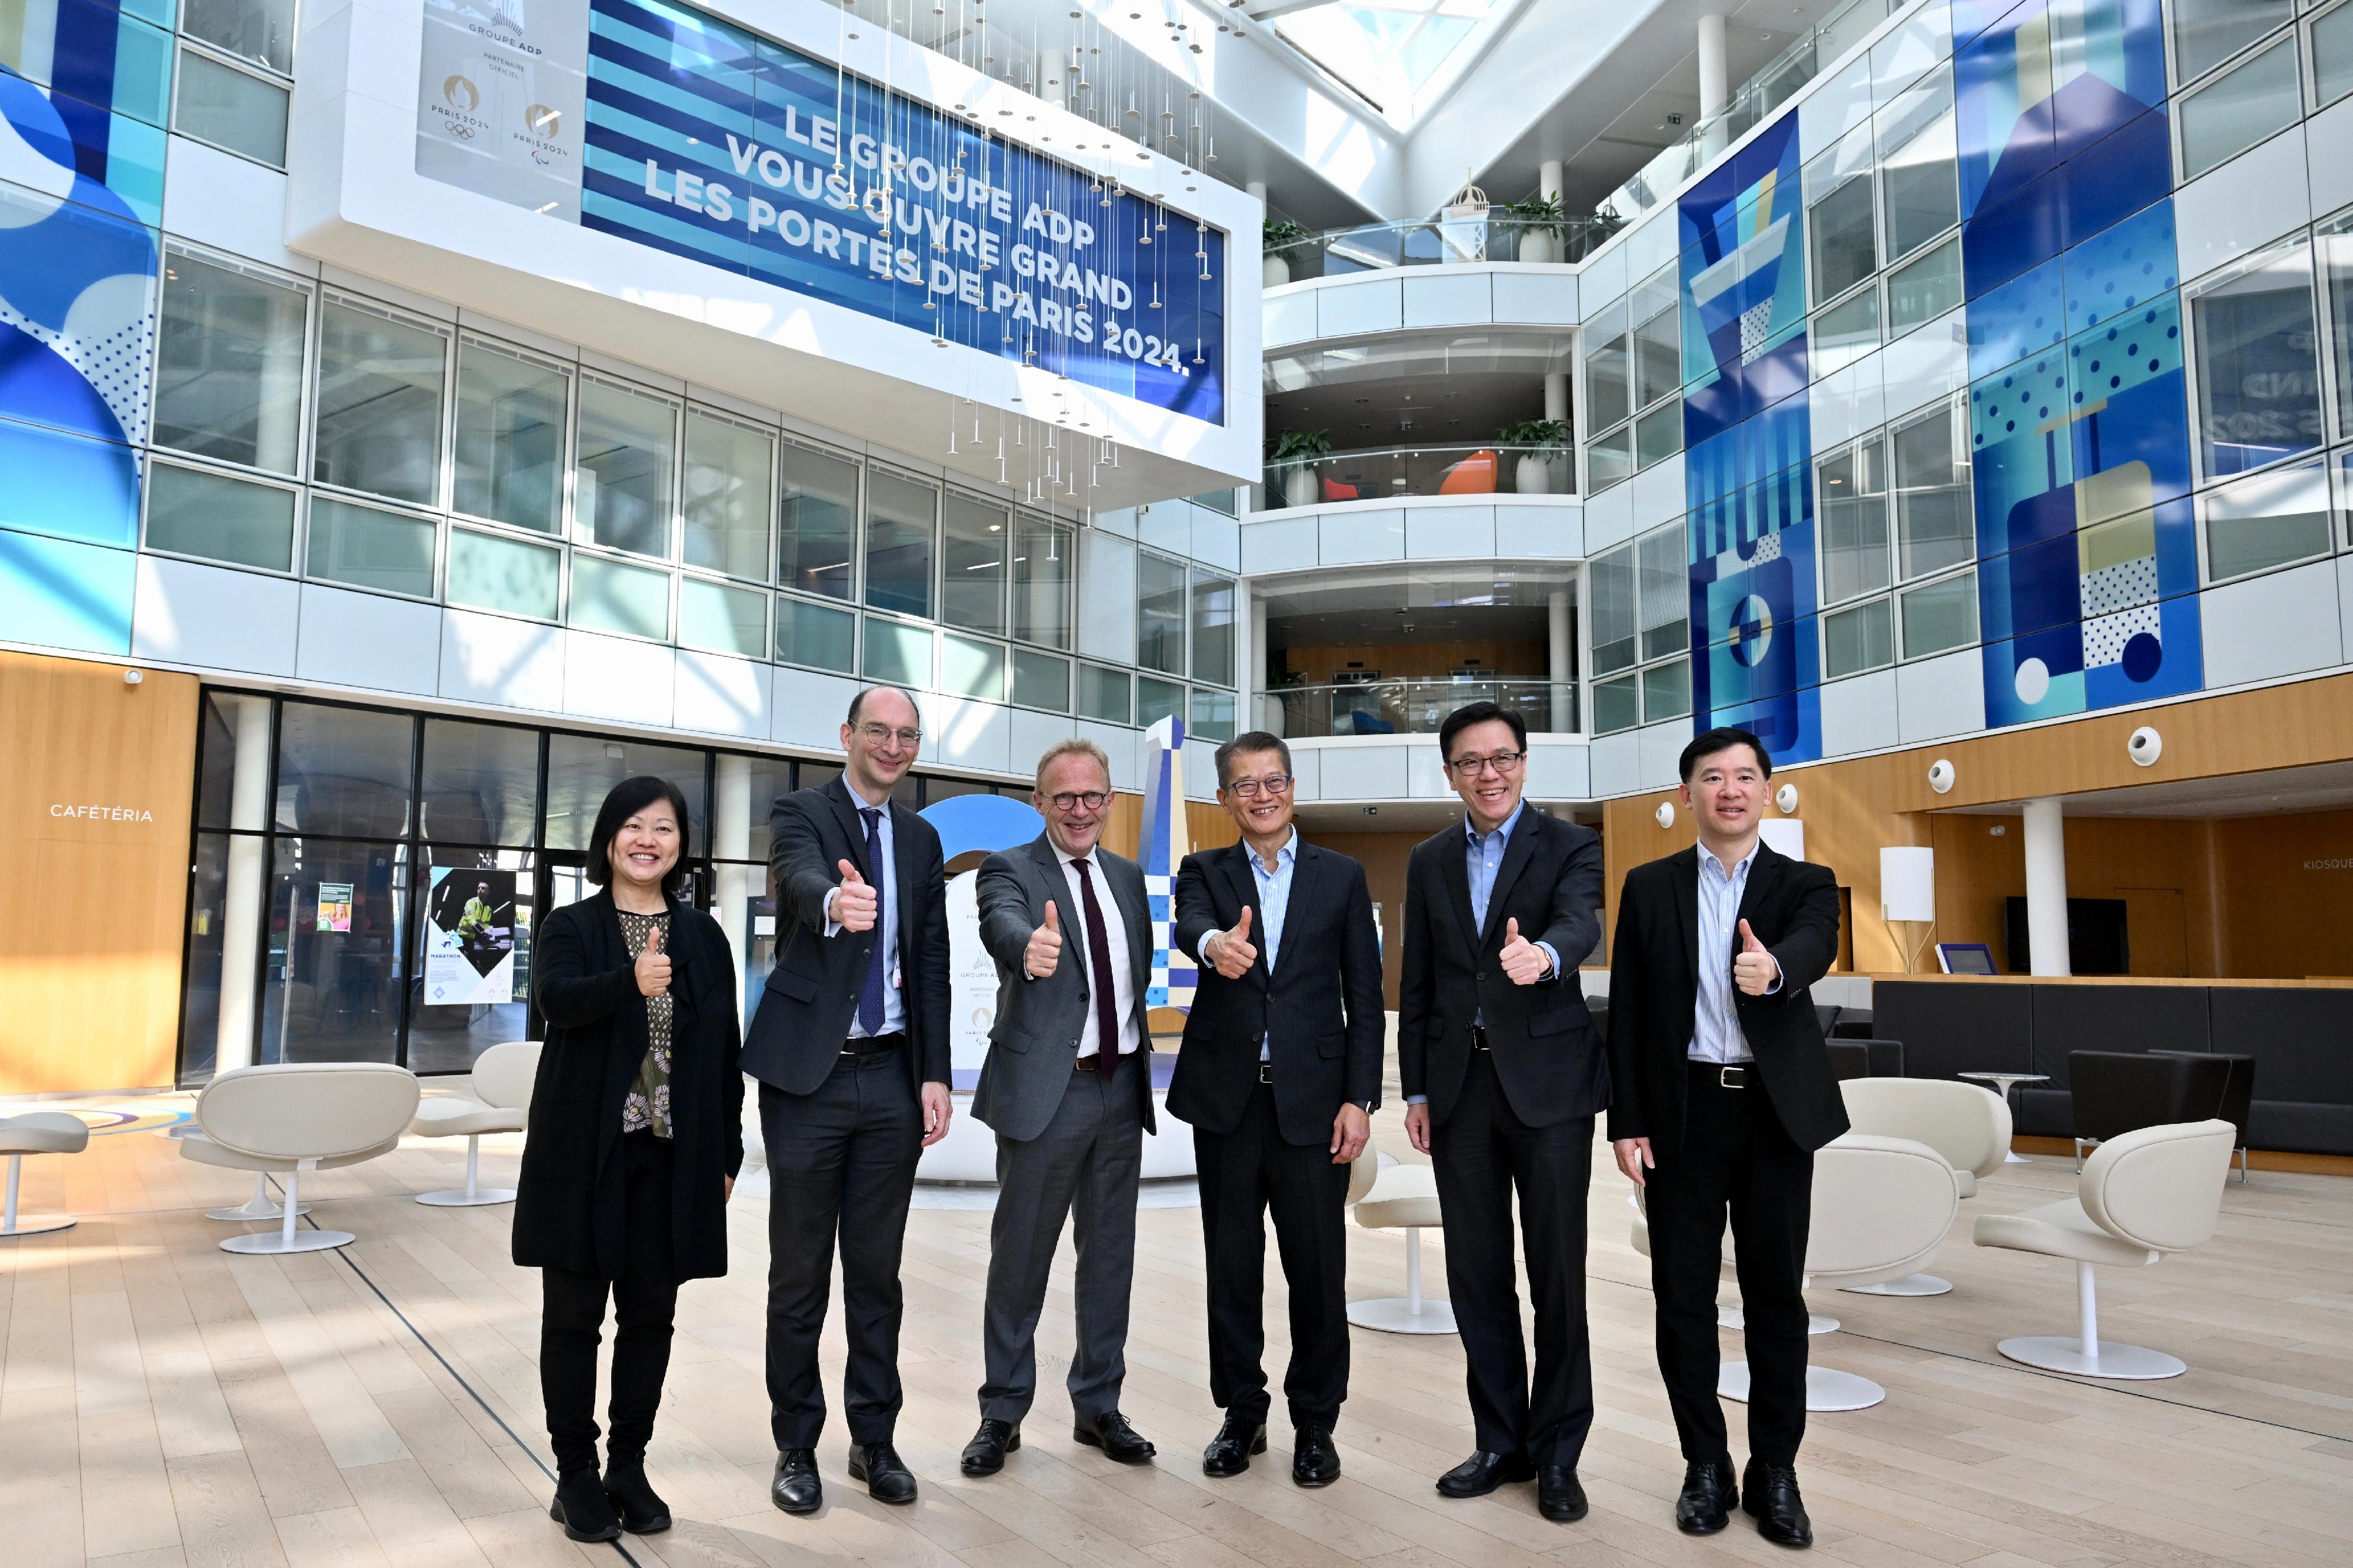 The Secretary for Innovation, Technology and Industry, Professor Sun Dong (second right), continued his visit in Paris, France on May 25 (Paris time). He accompanied the Financial Secretary, Mr Paul Chan (third right), to visit the Groupe ADP Innovation Hub located at the headquarters of Groupe ADP at Paris Charles de Gaulle Airport. The Under Secretary for Constitutional and Mainland Affairs, Mr Clement Woo (first right), and the Special Representative for Hong Kong Economic and Trade Affairs to the European Union, Miss Shirley Yung (first left), also attended.